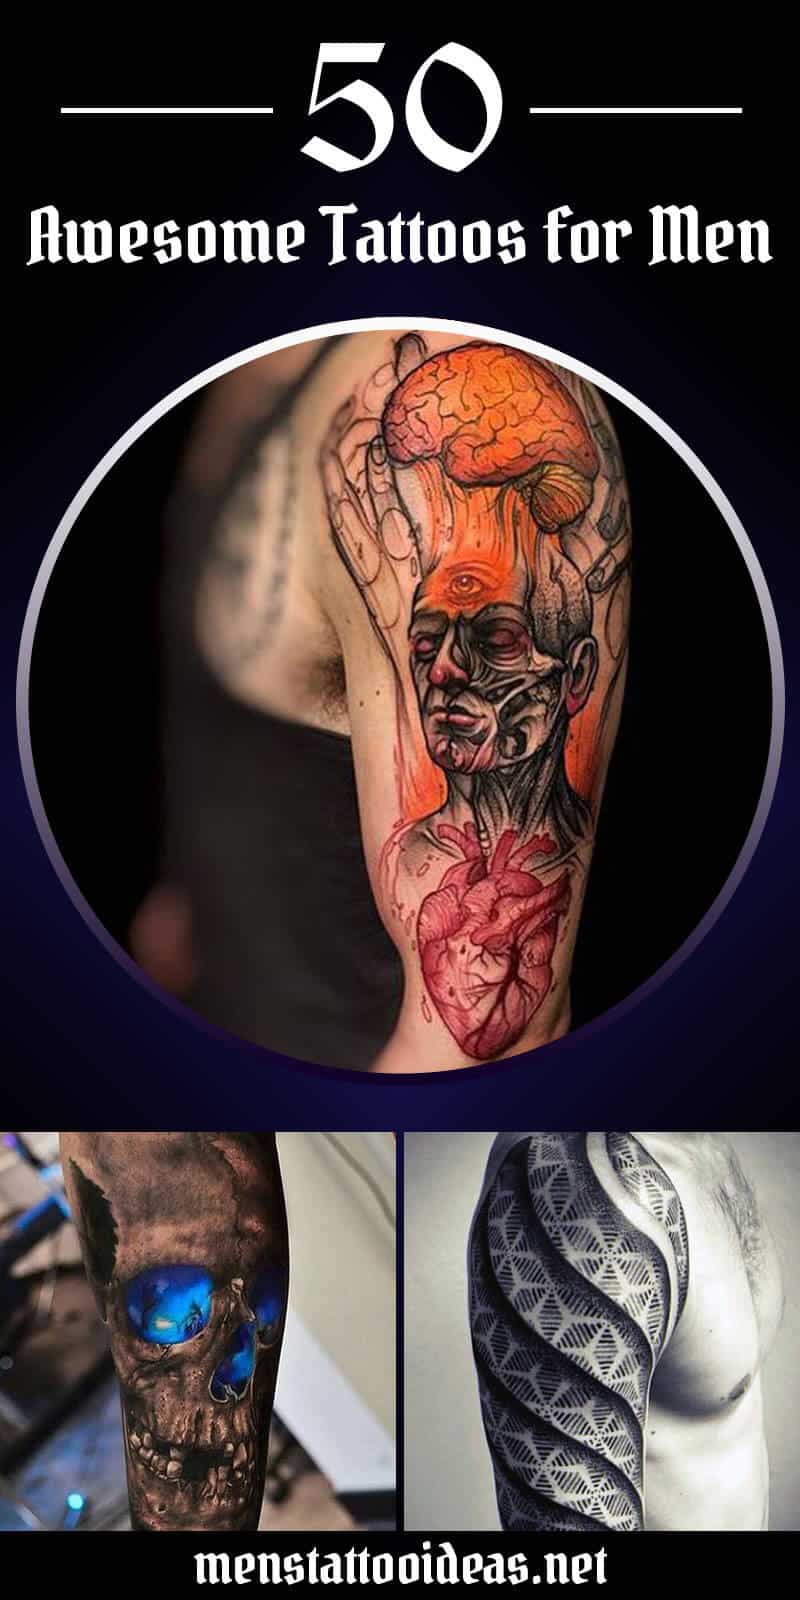 Awesome Tattoos for Men - Ideas and Designs for Guys